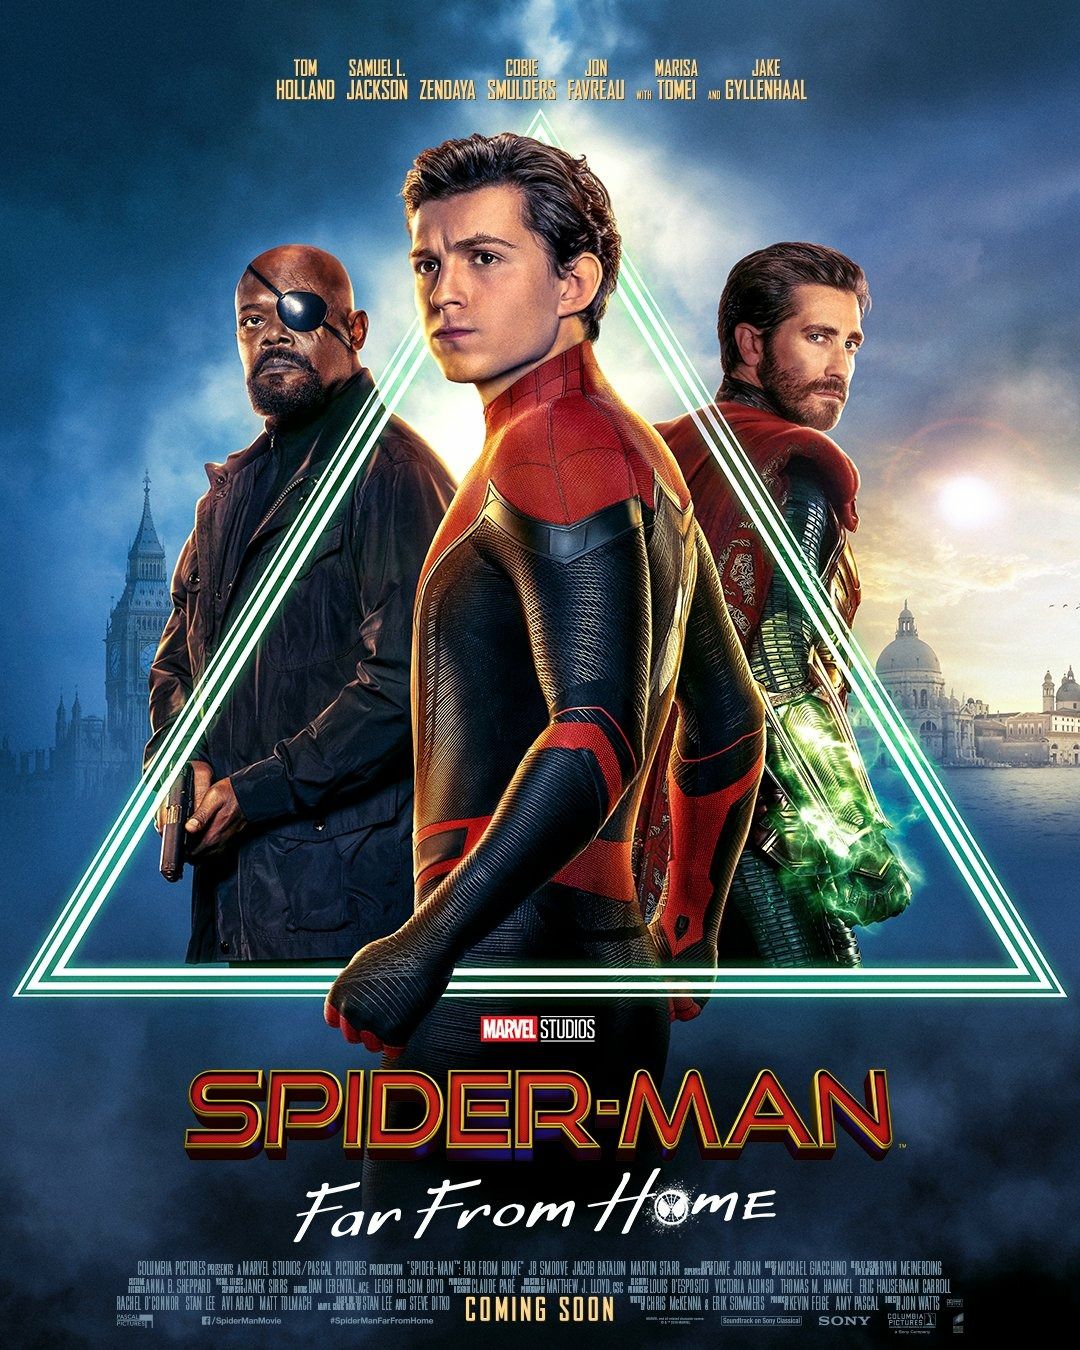 Spider-Man: Far From Home Posters Look off into the Distance ...